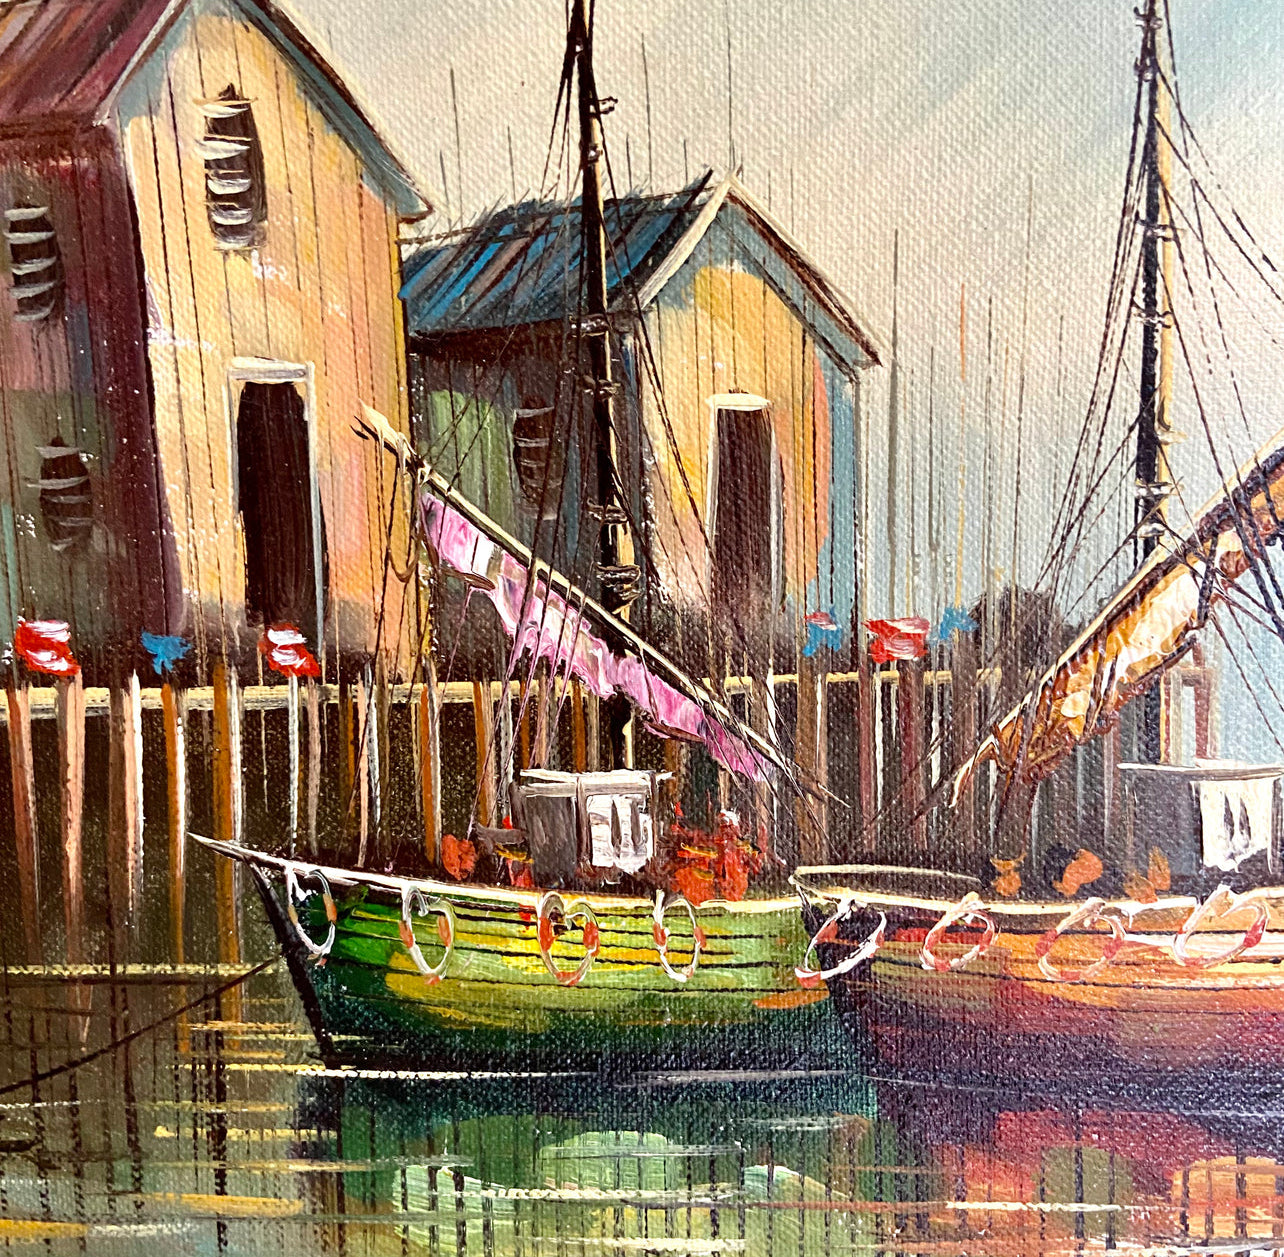 Handsome mid century original oil painting signed by artist Black waterfront boats.